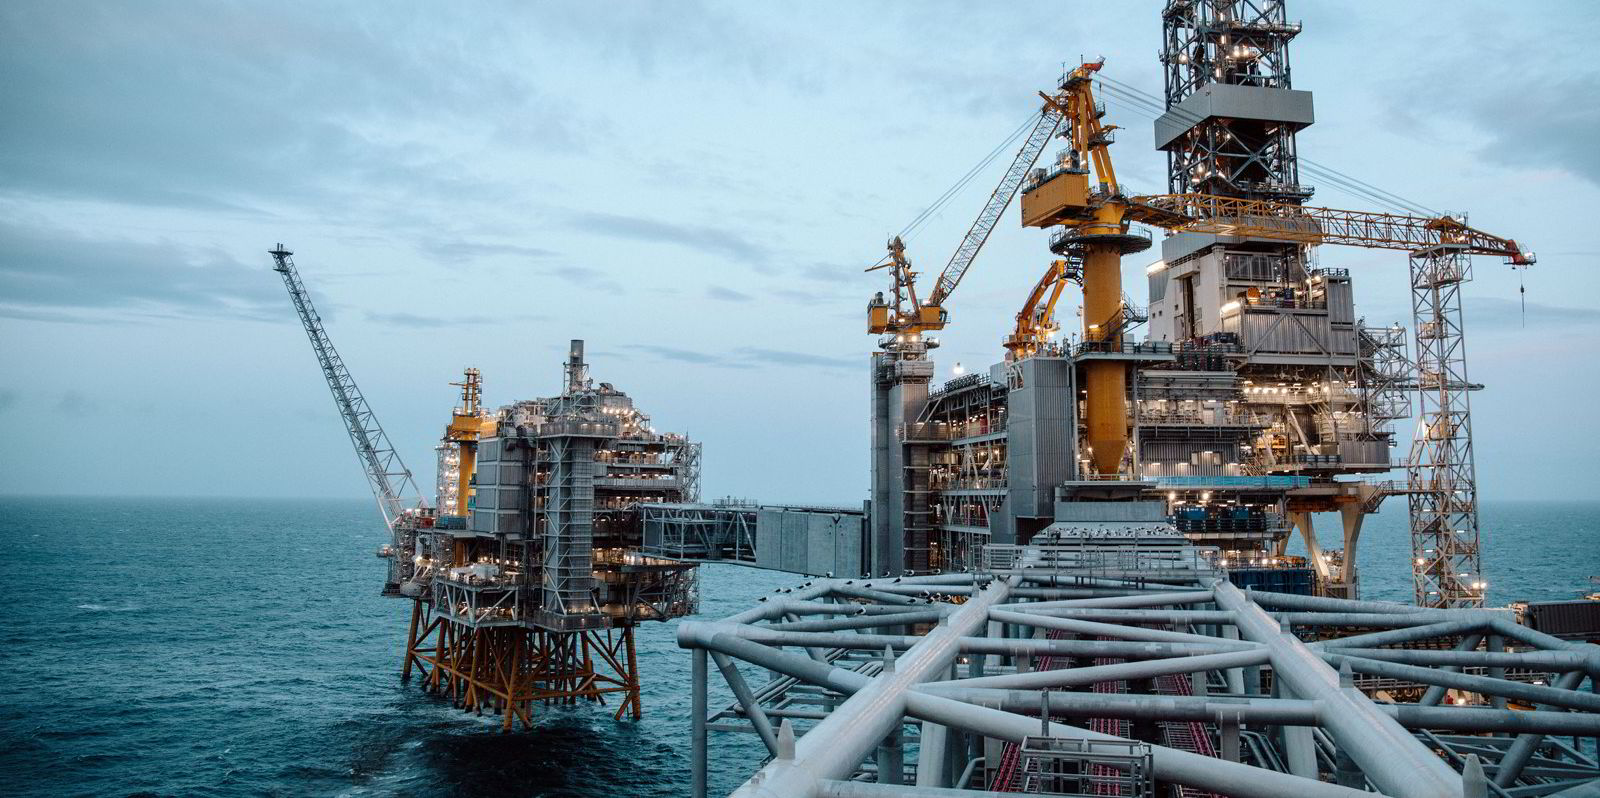 Equinor's Johan Sverdrup 2 set to ramp up production after power outage